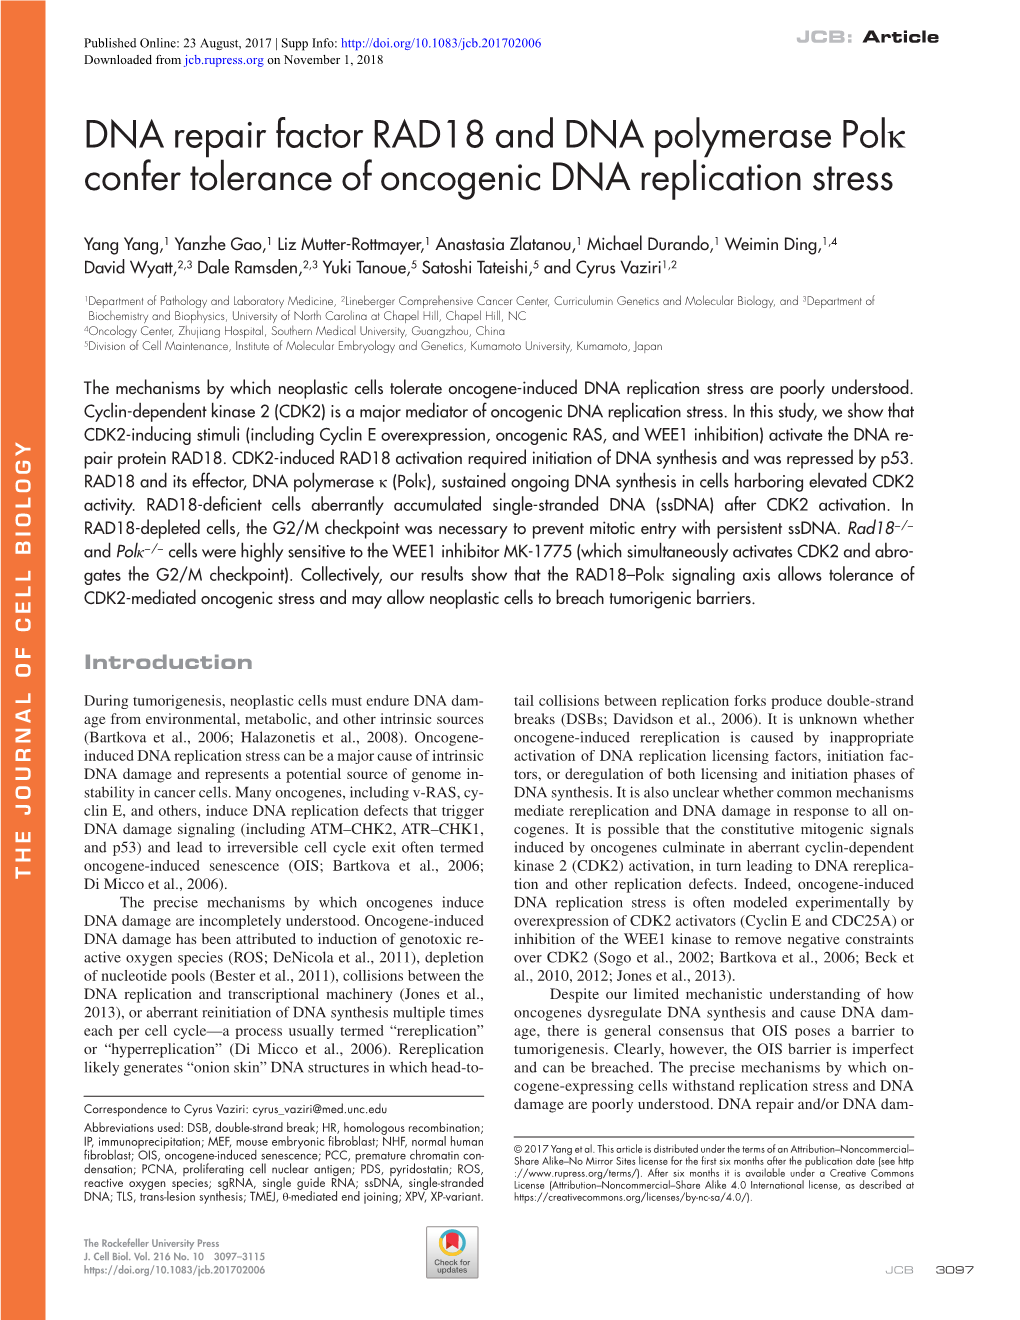 DNA Repair Factor RAD18 and DNA Polymerase Polκ Confer Tolerance of Oncogenic DNA Replication Stress